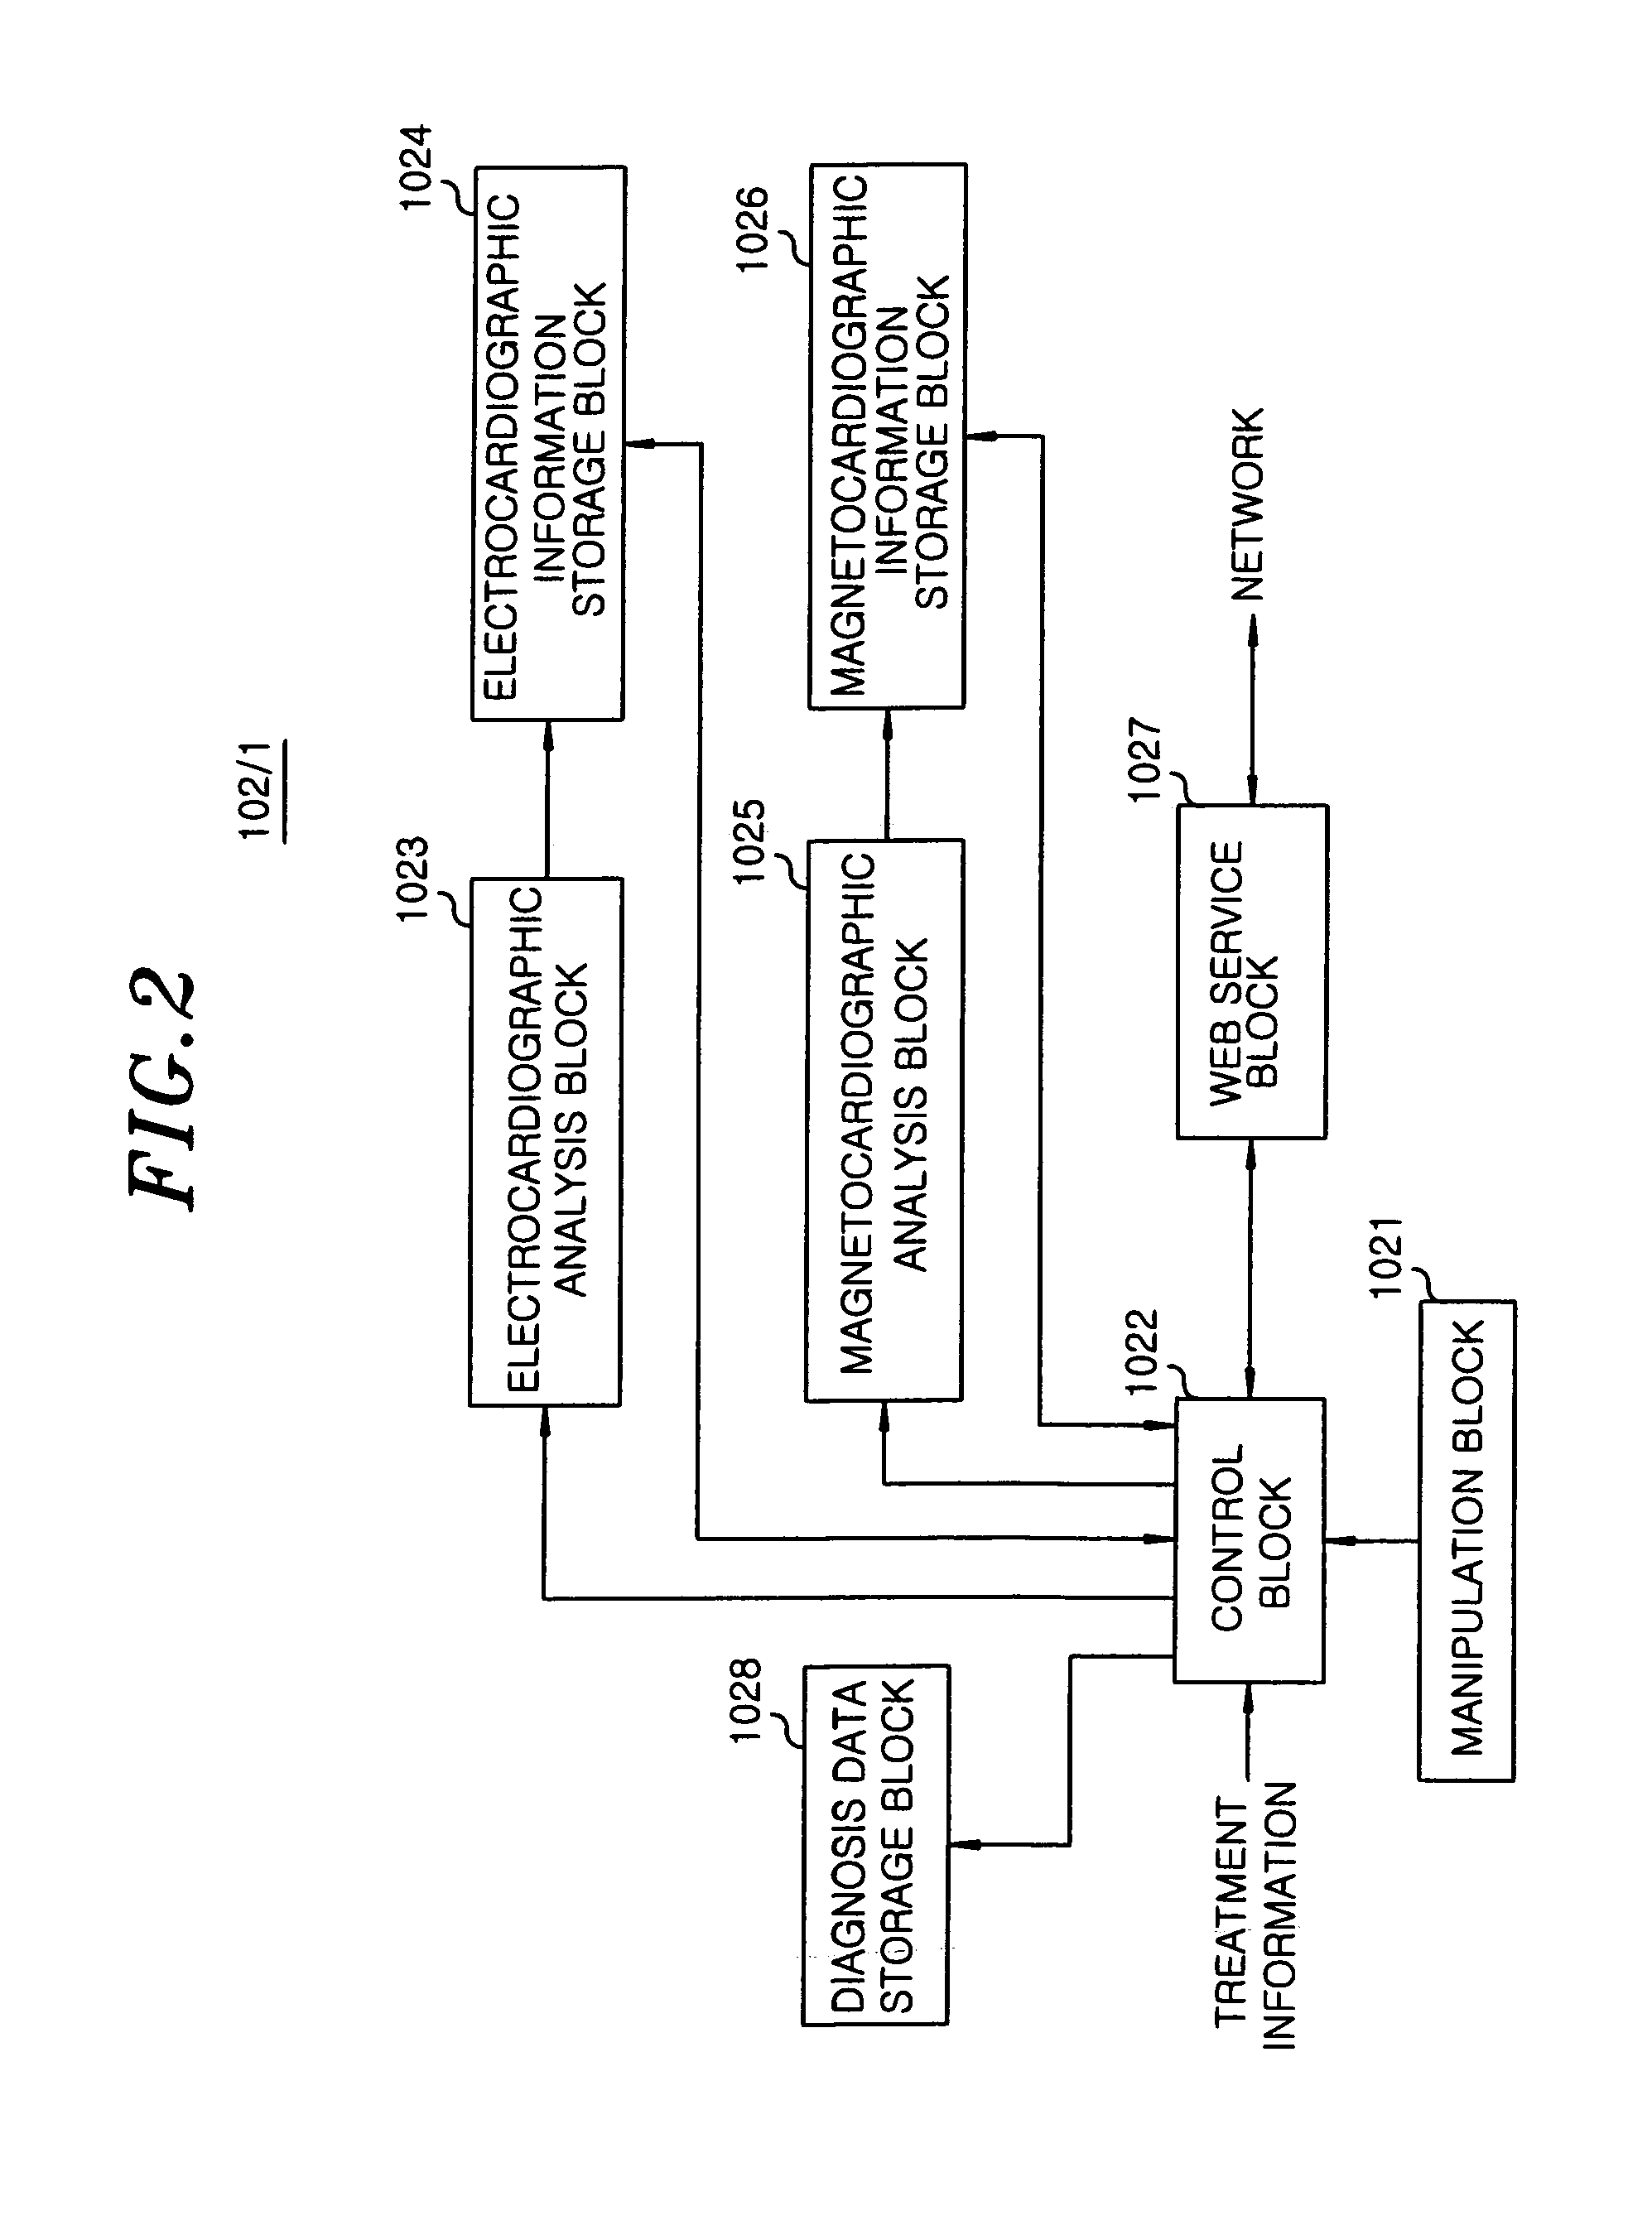 System and method for providing cardiovascular disorder diagnosis services